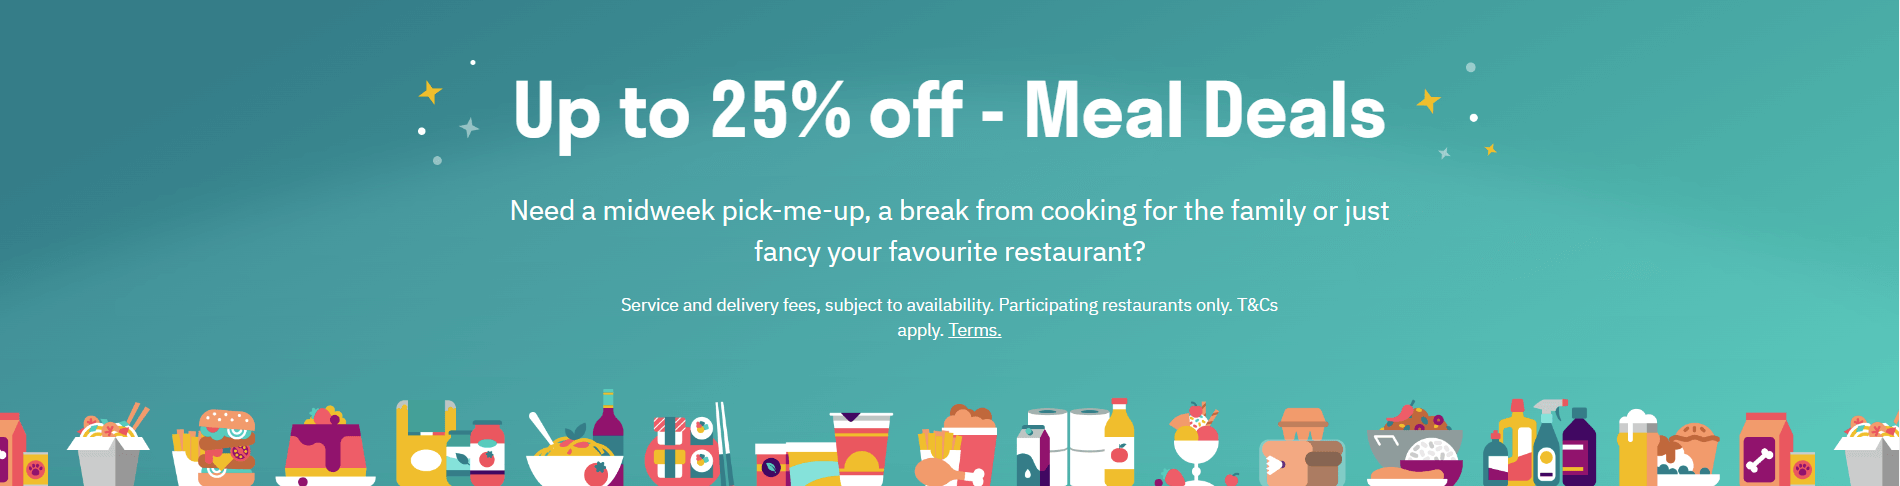 Deliveroo - 25% Off